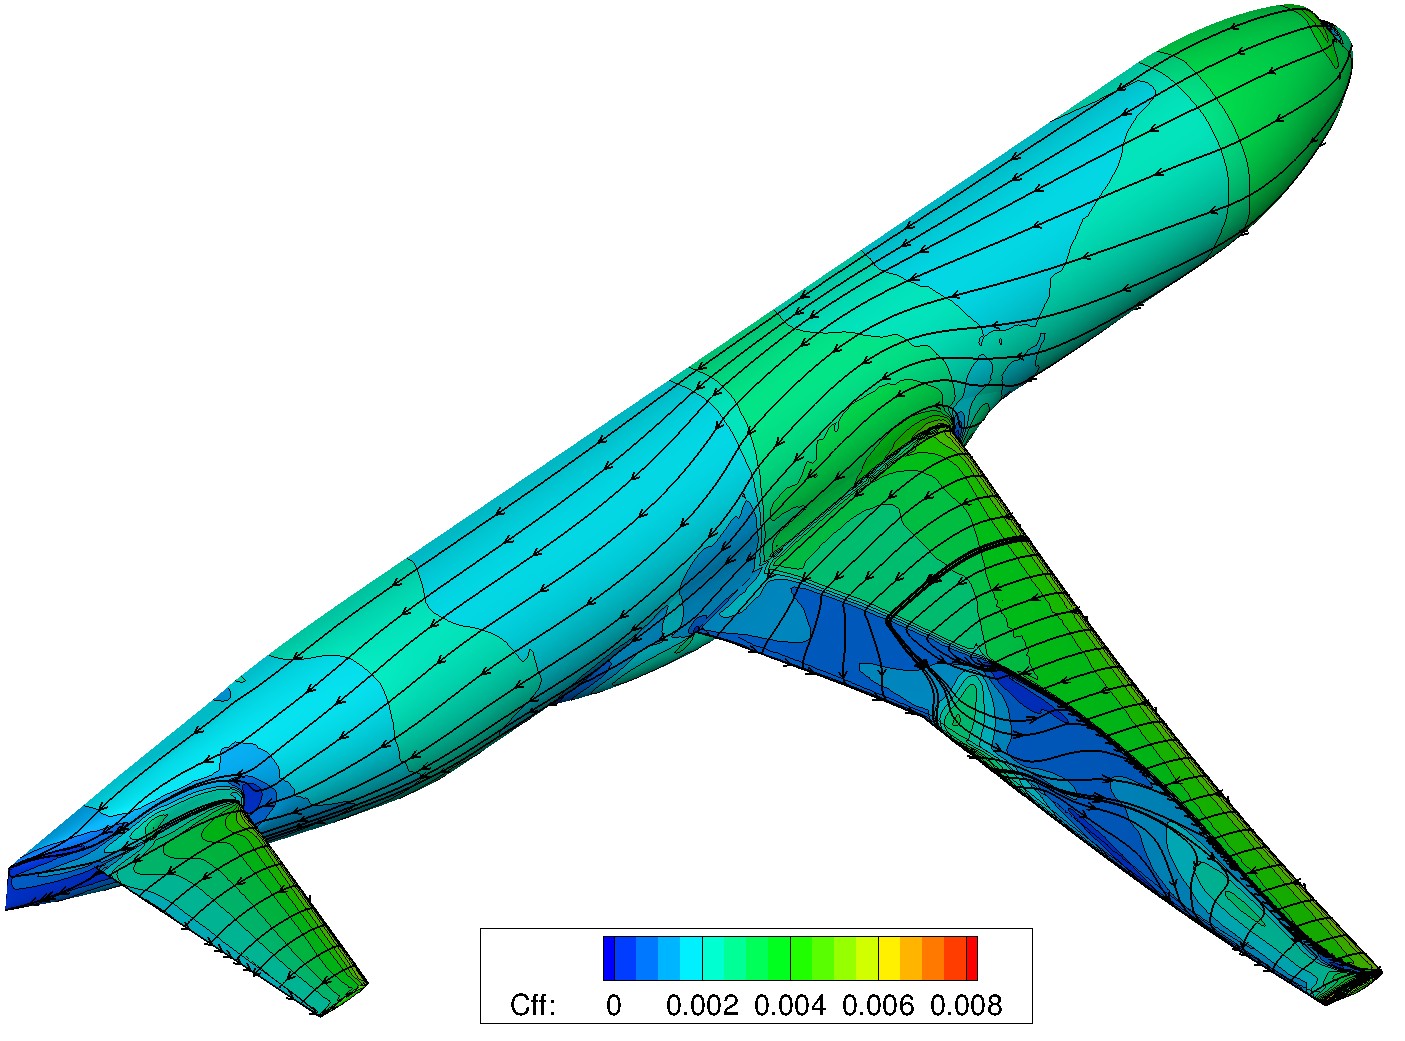 Image of surface pressure on wing and tail of Common Research Model